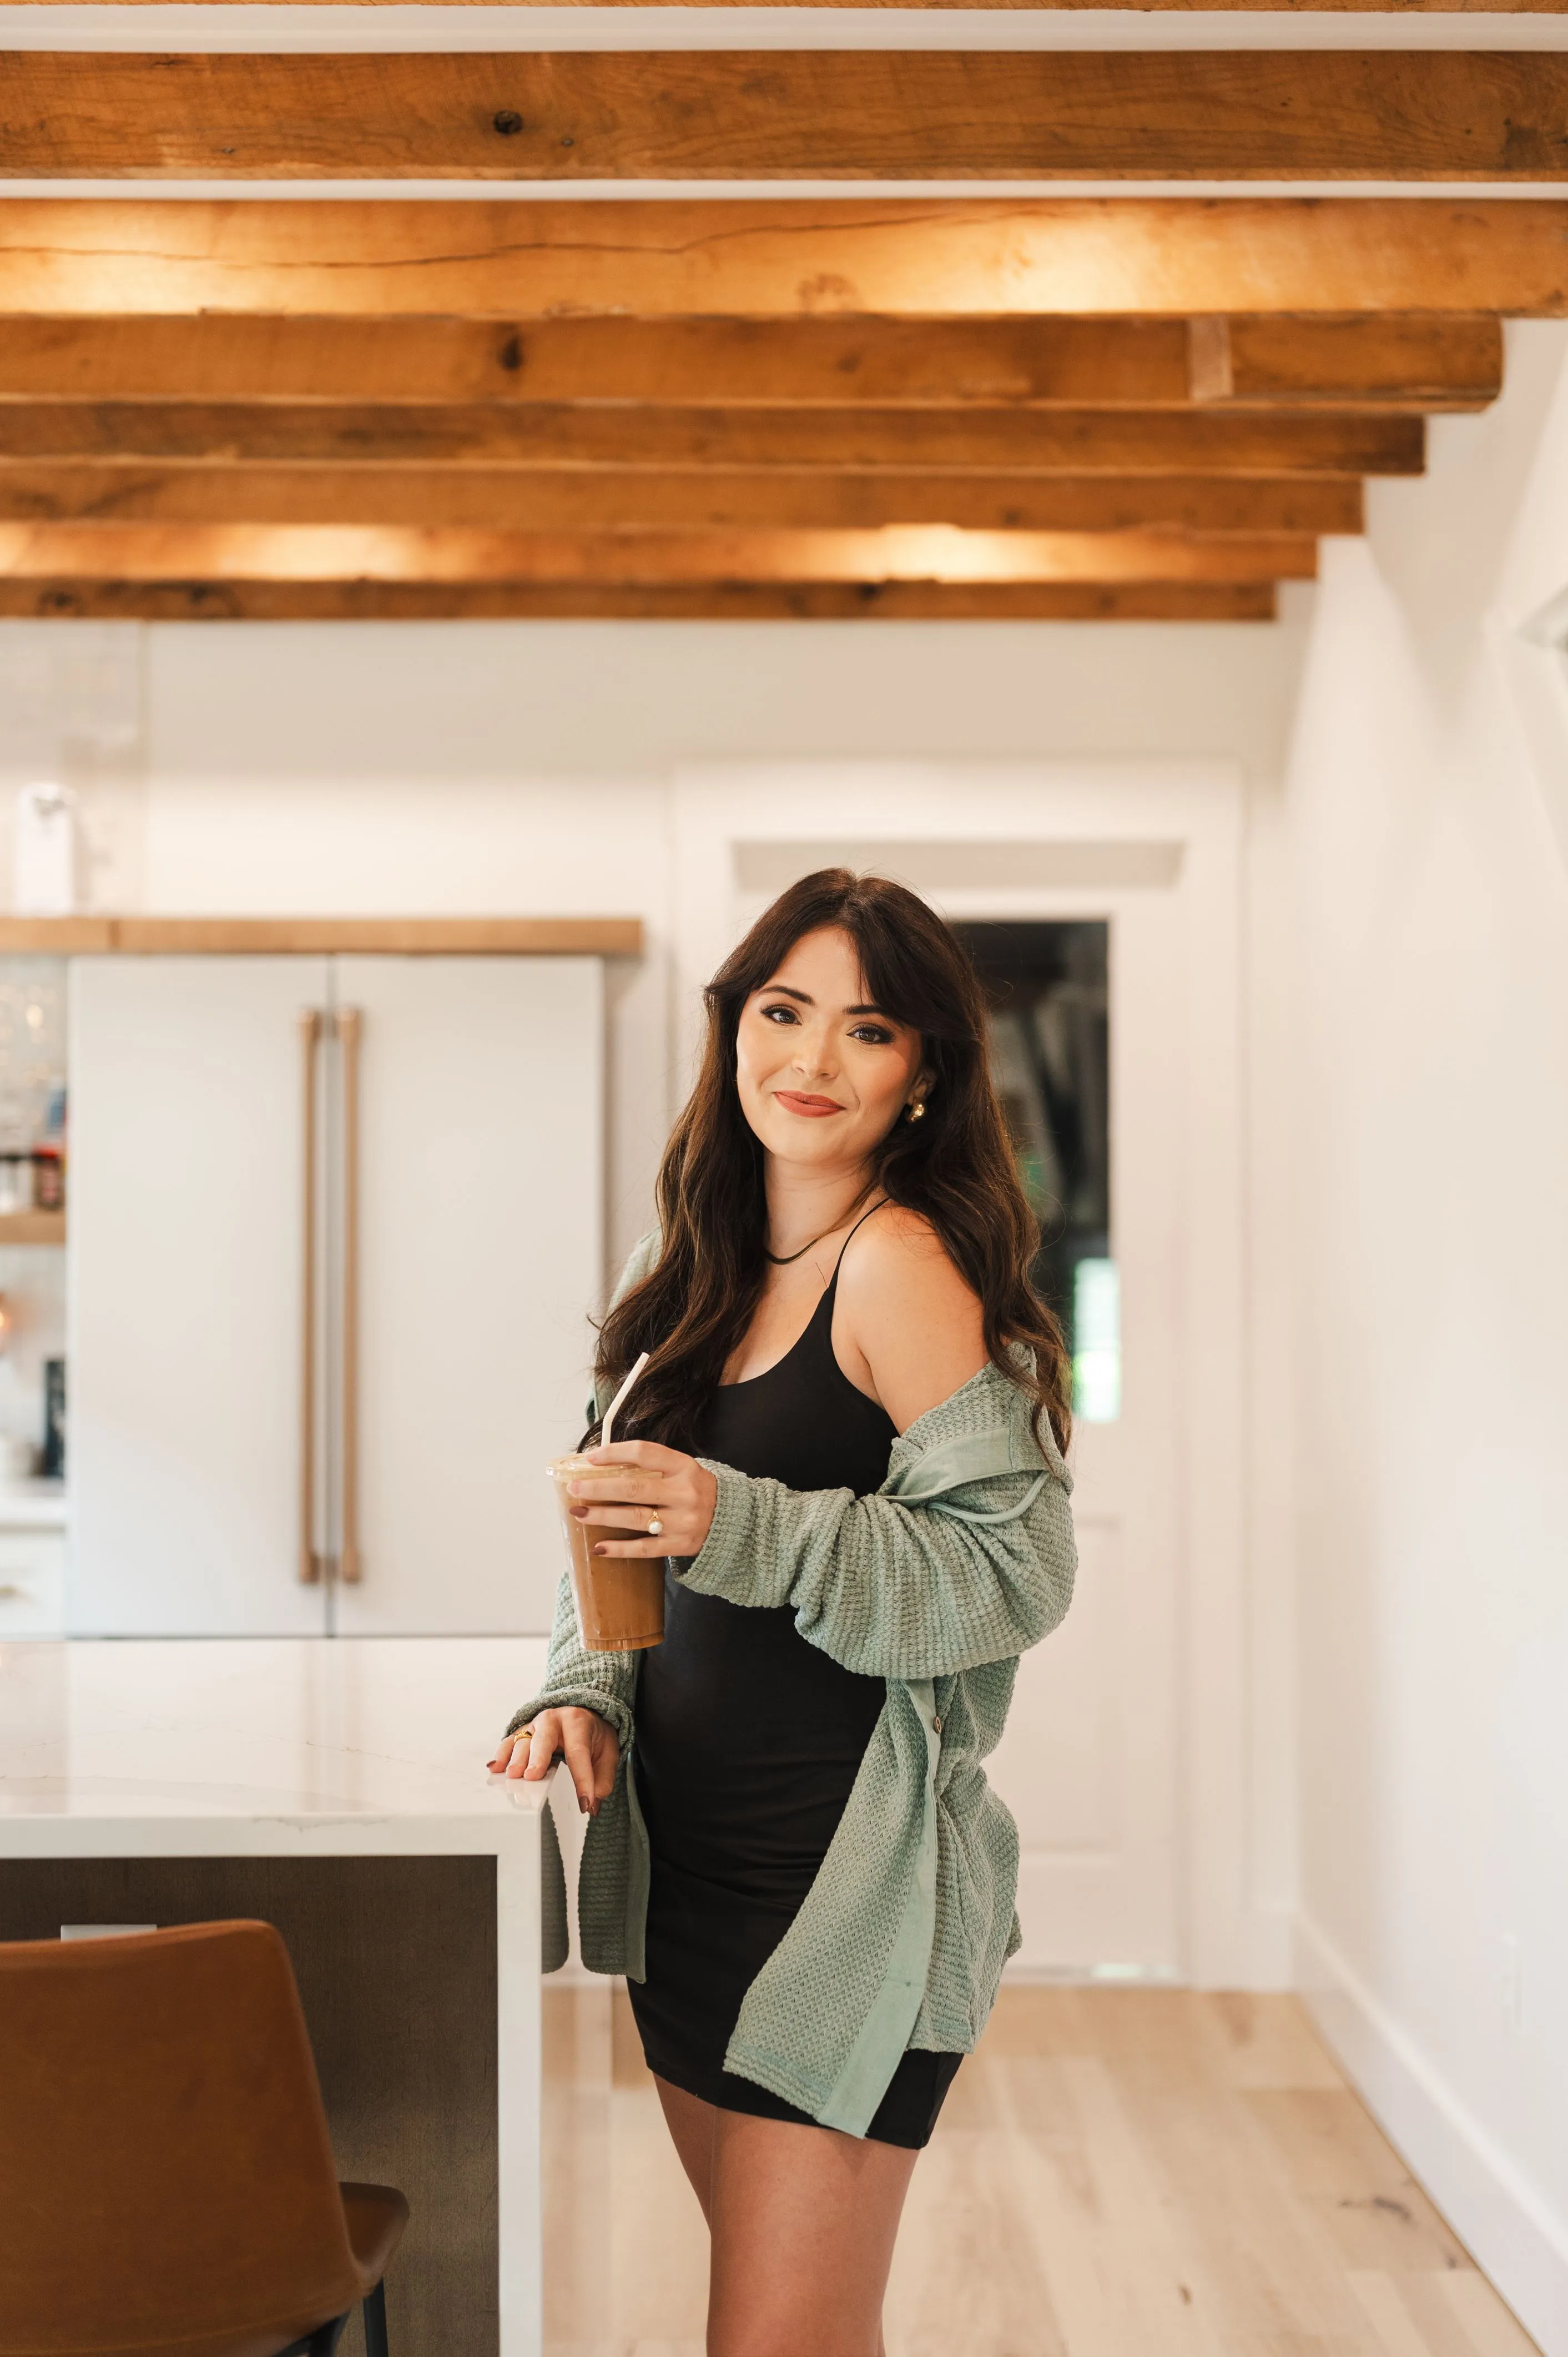 Woman standing in a modern kitchen holding a cold beverage, wearing a black dress and a green cardigan, with exposed ceiling beams above.